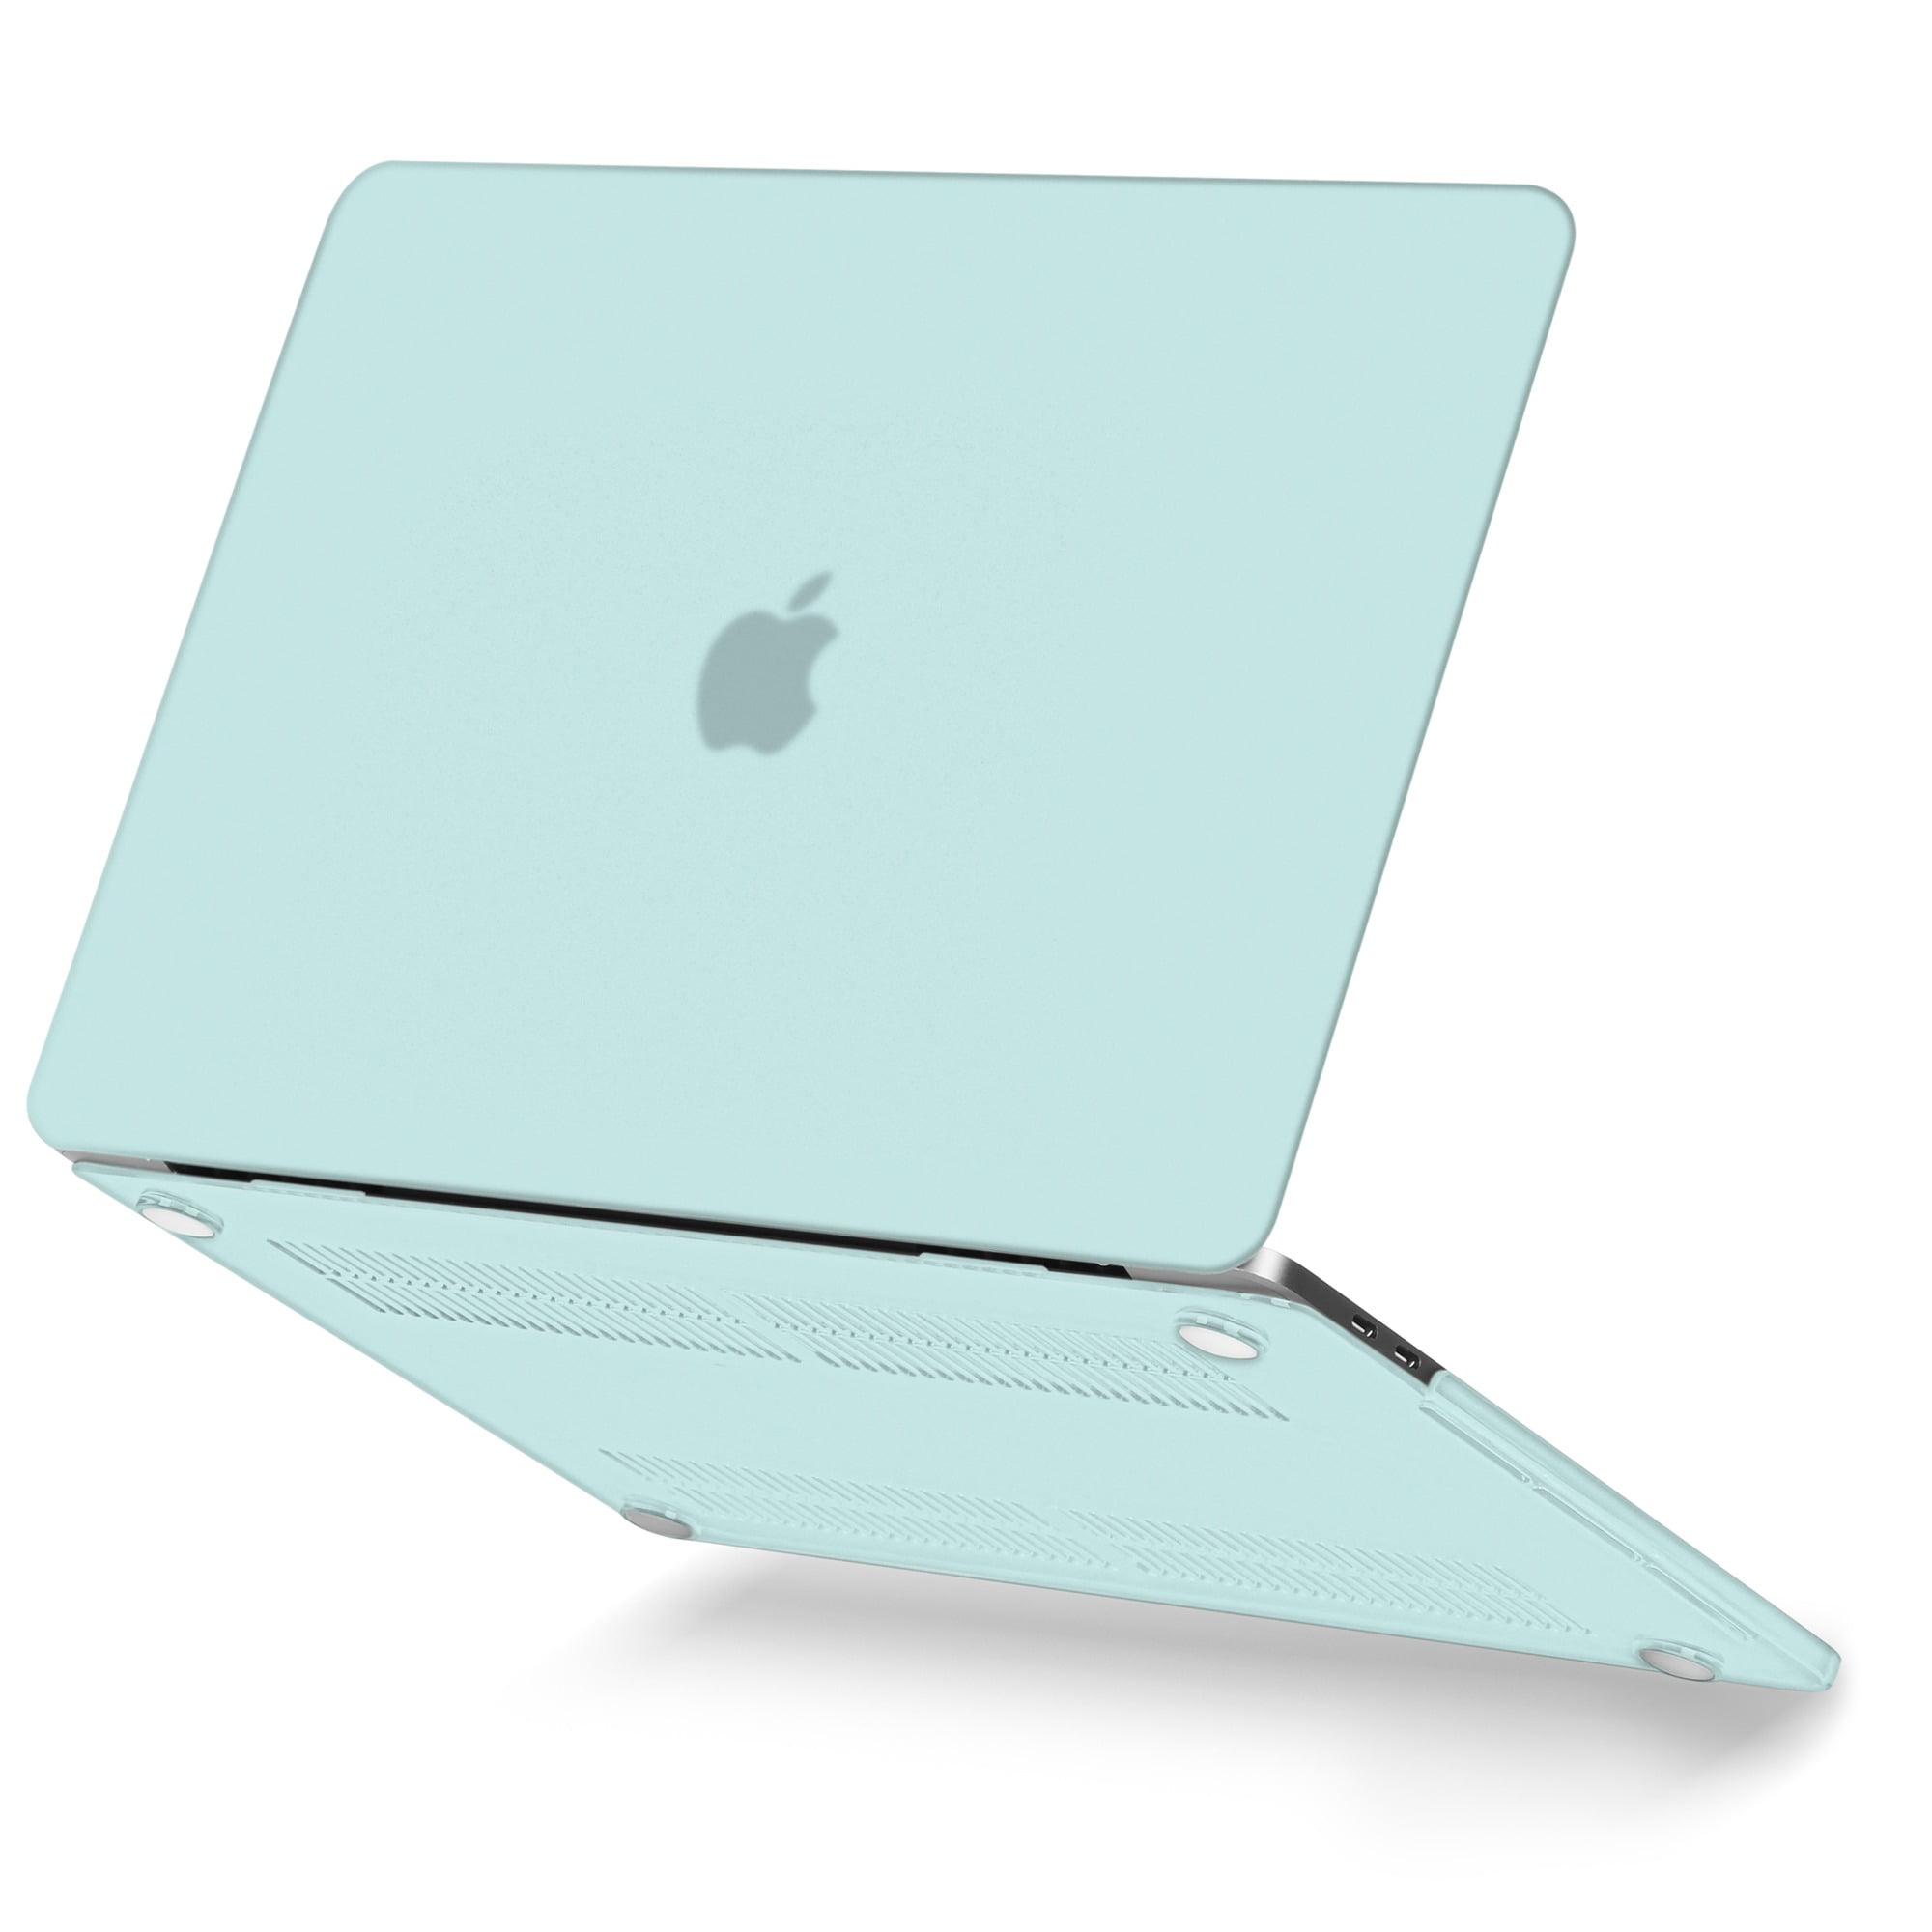 A1342 Matte Hard Rubberized Case Cover For Apple Macbook White 13-inch 